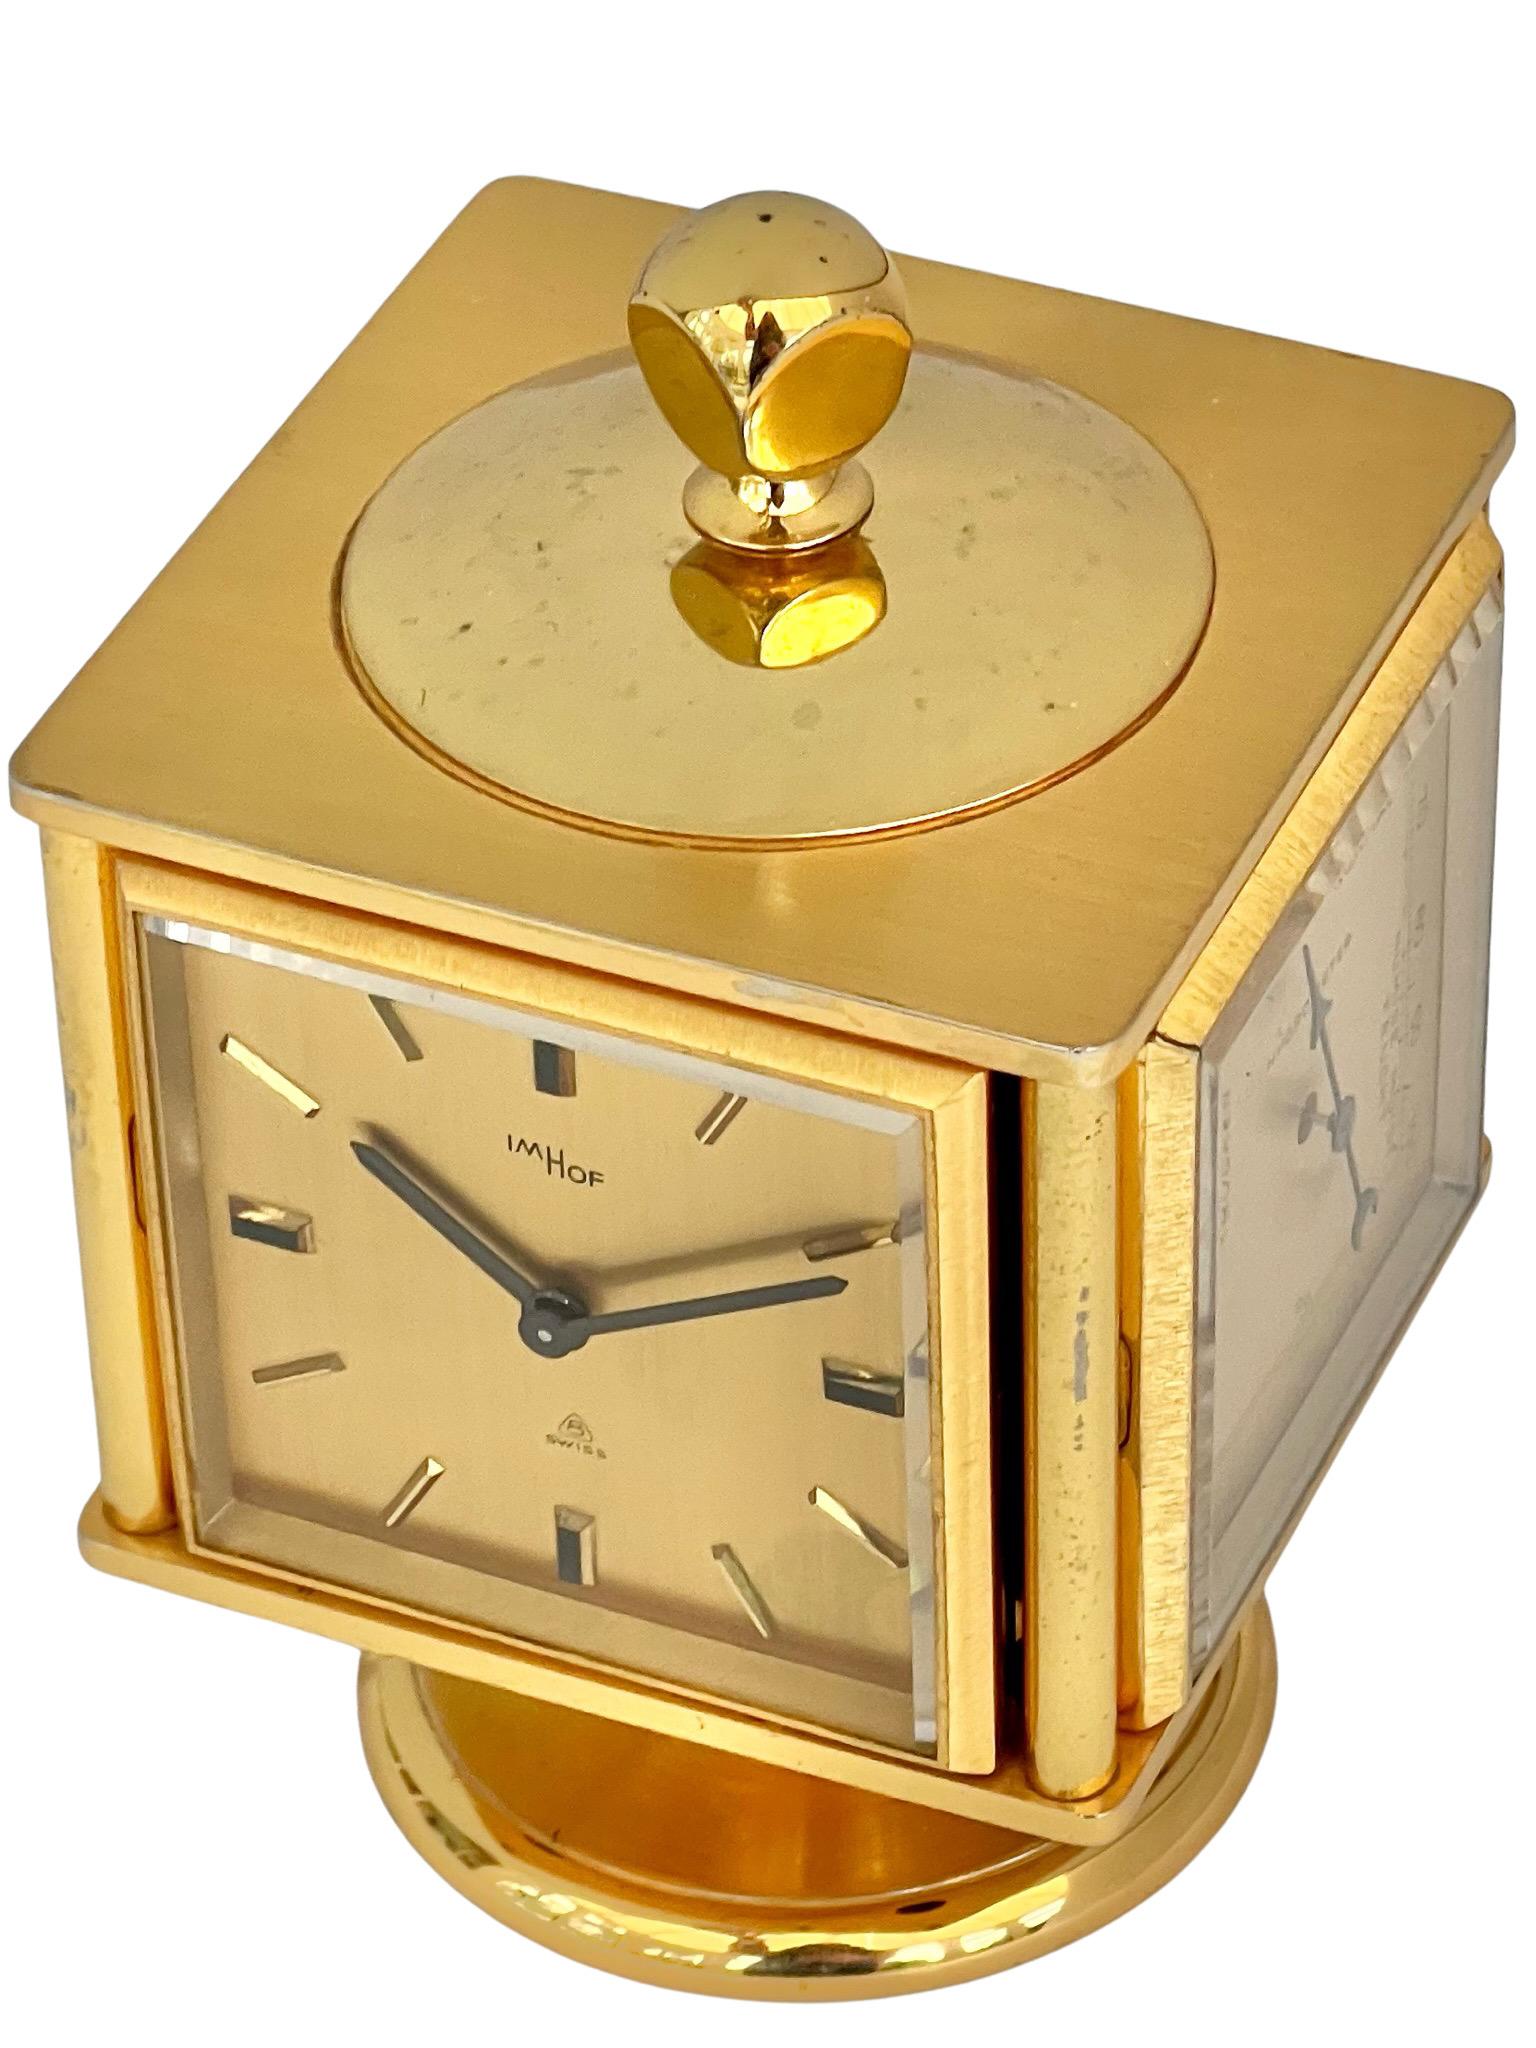 Imhof Midcentury Gilt Desk Clock and Weather Compendium For Sale 2